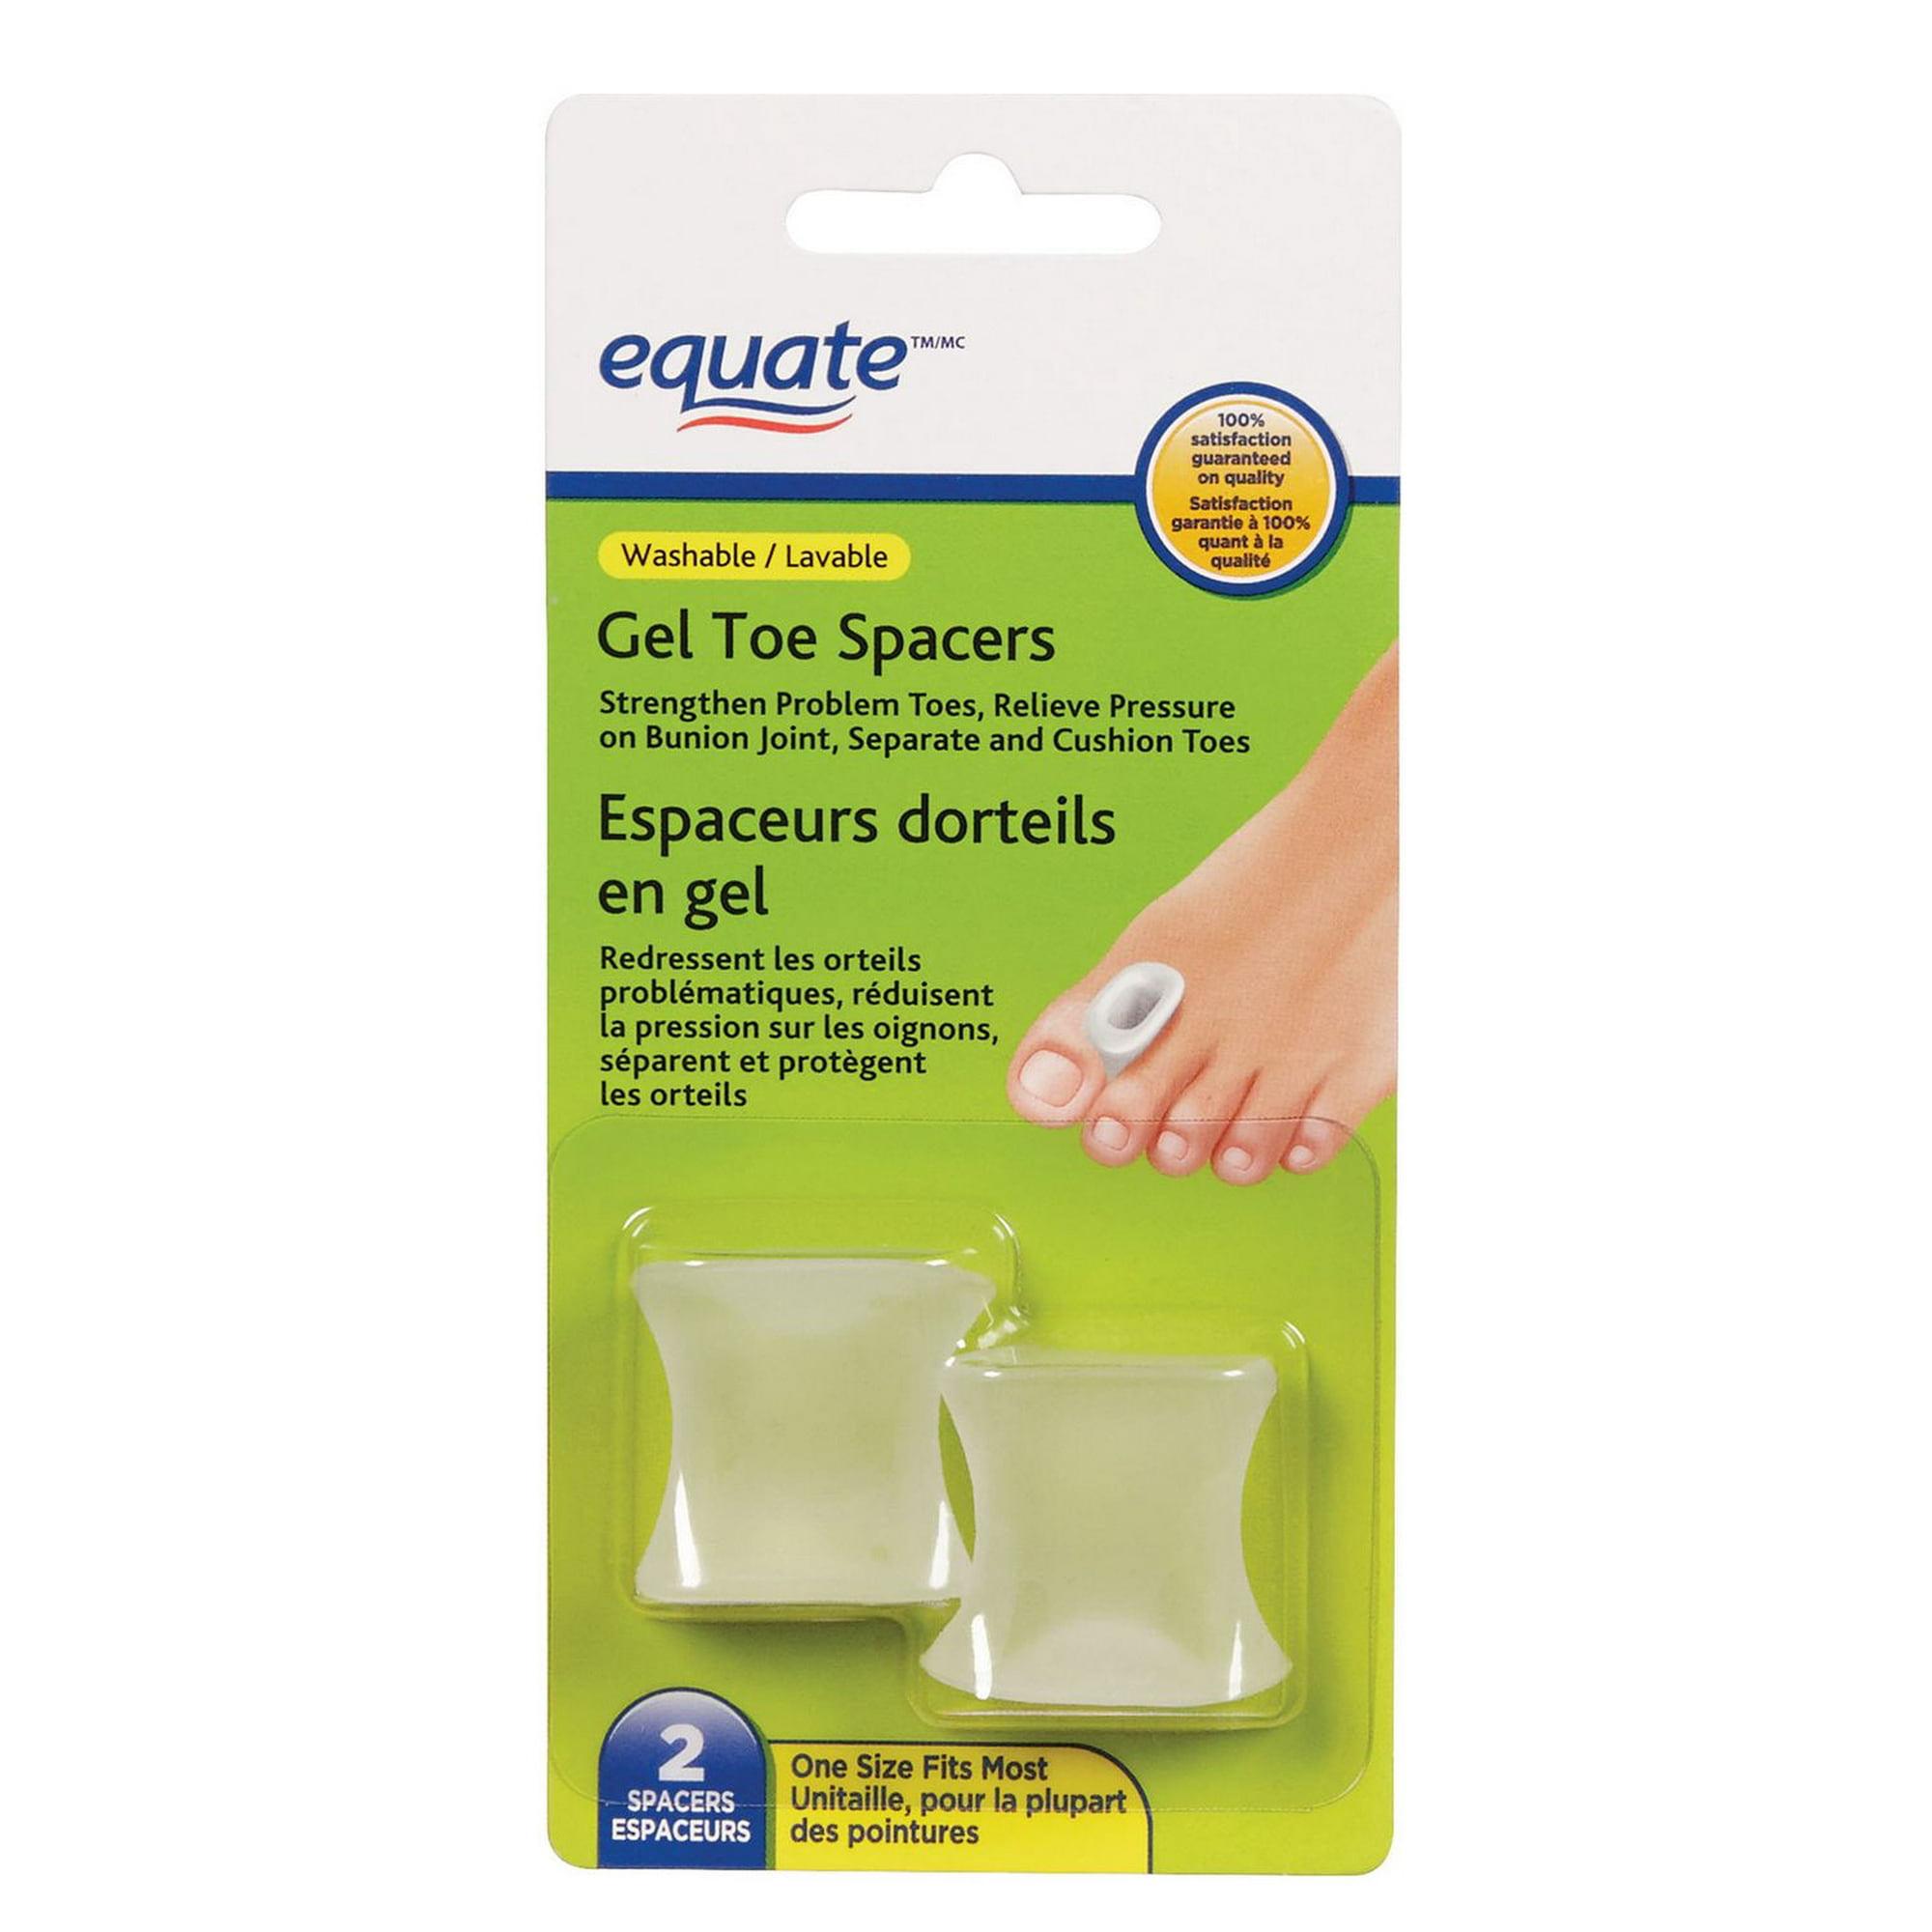 Spread those toes! Another way to spread them is interlacing your